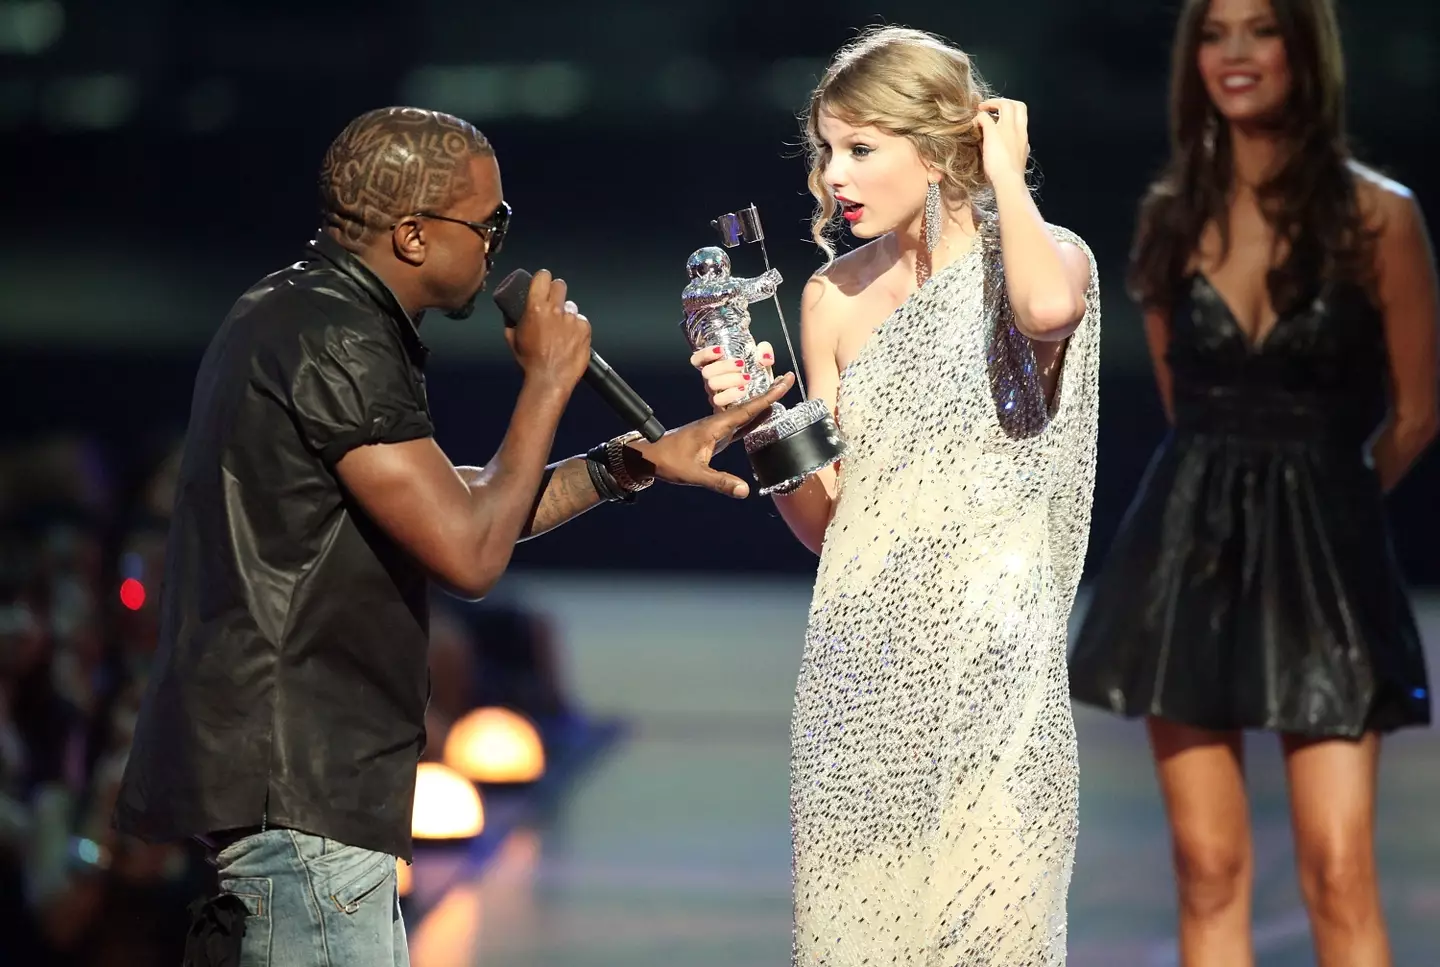 Kanye and Taylor's feud dates back to 2009.